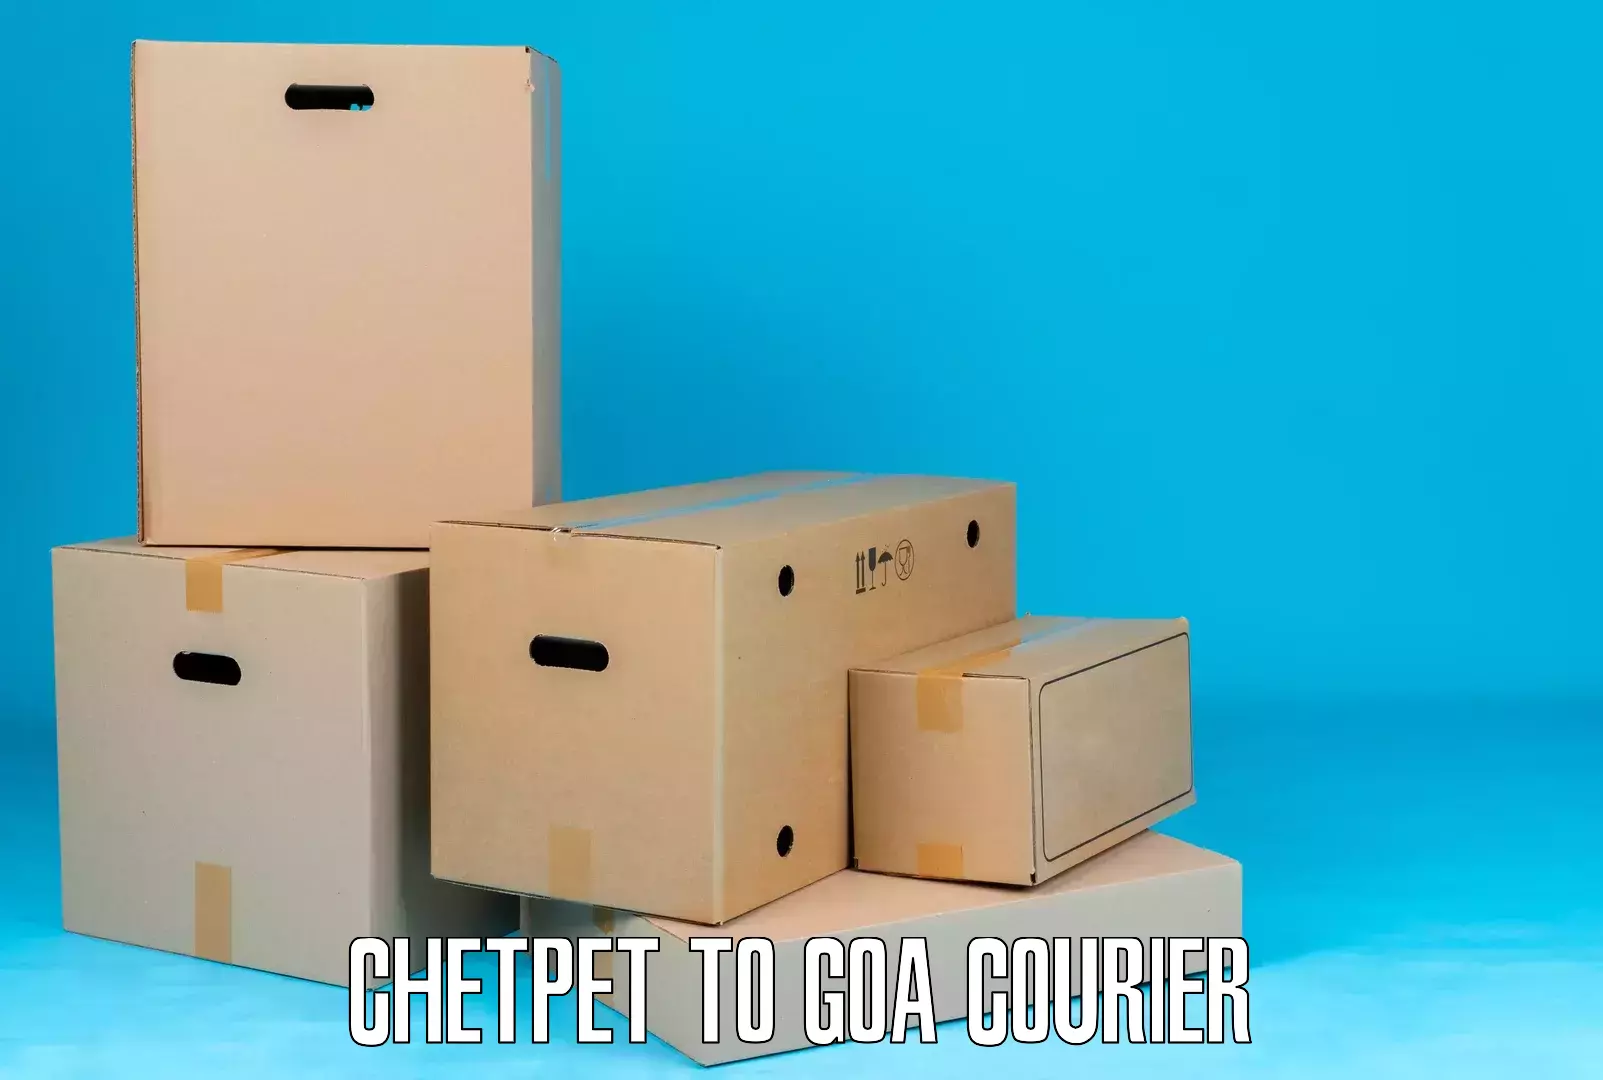 Efficient shipping operations Chetpet to South Goa